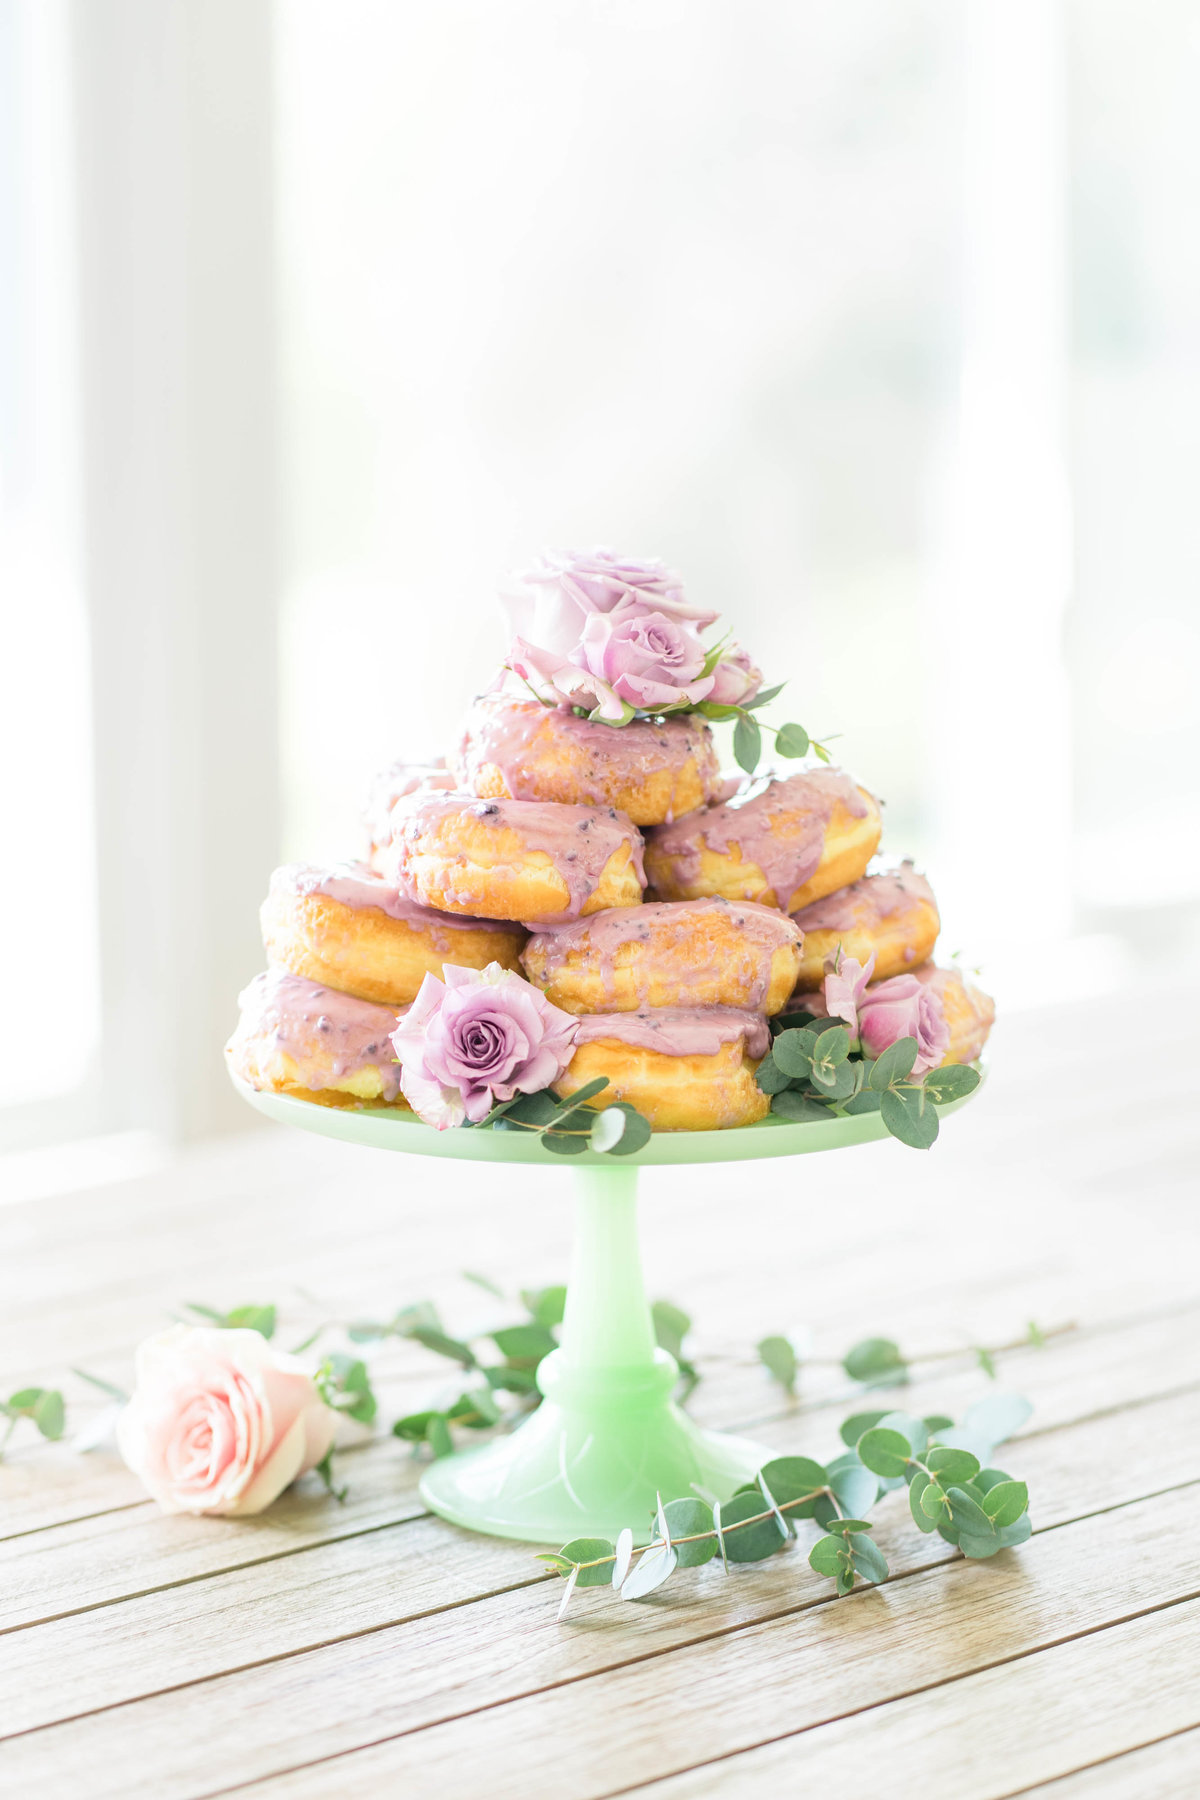 Donuts on green stand with pink roses